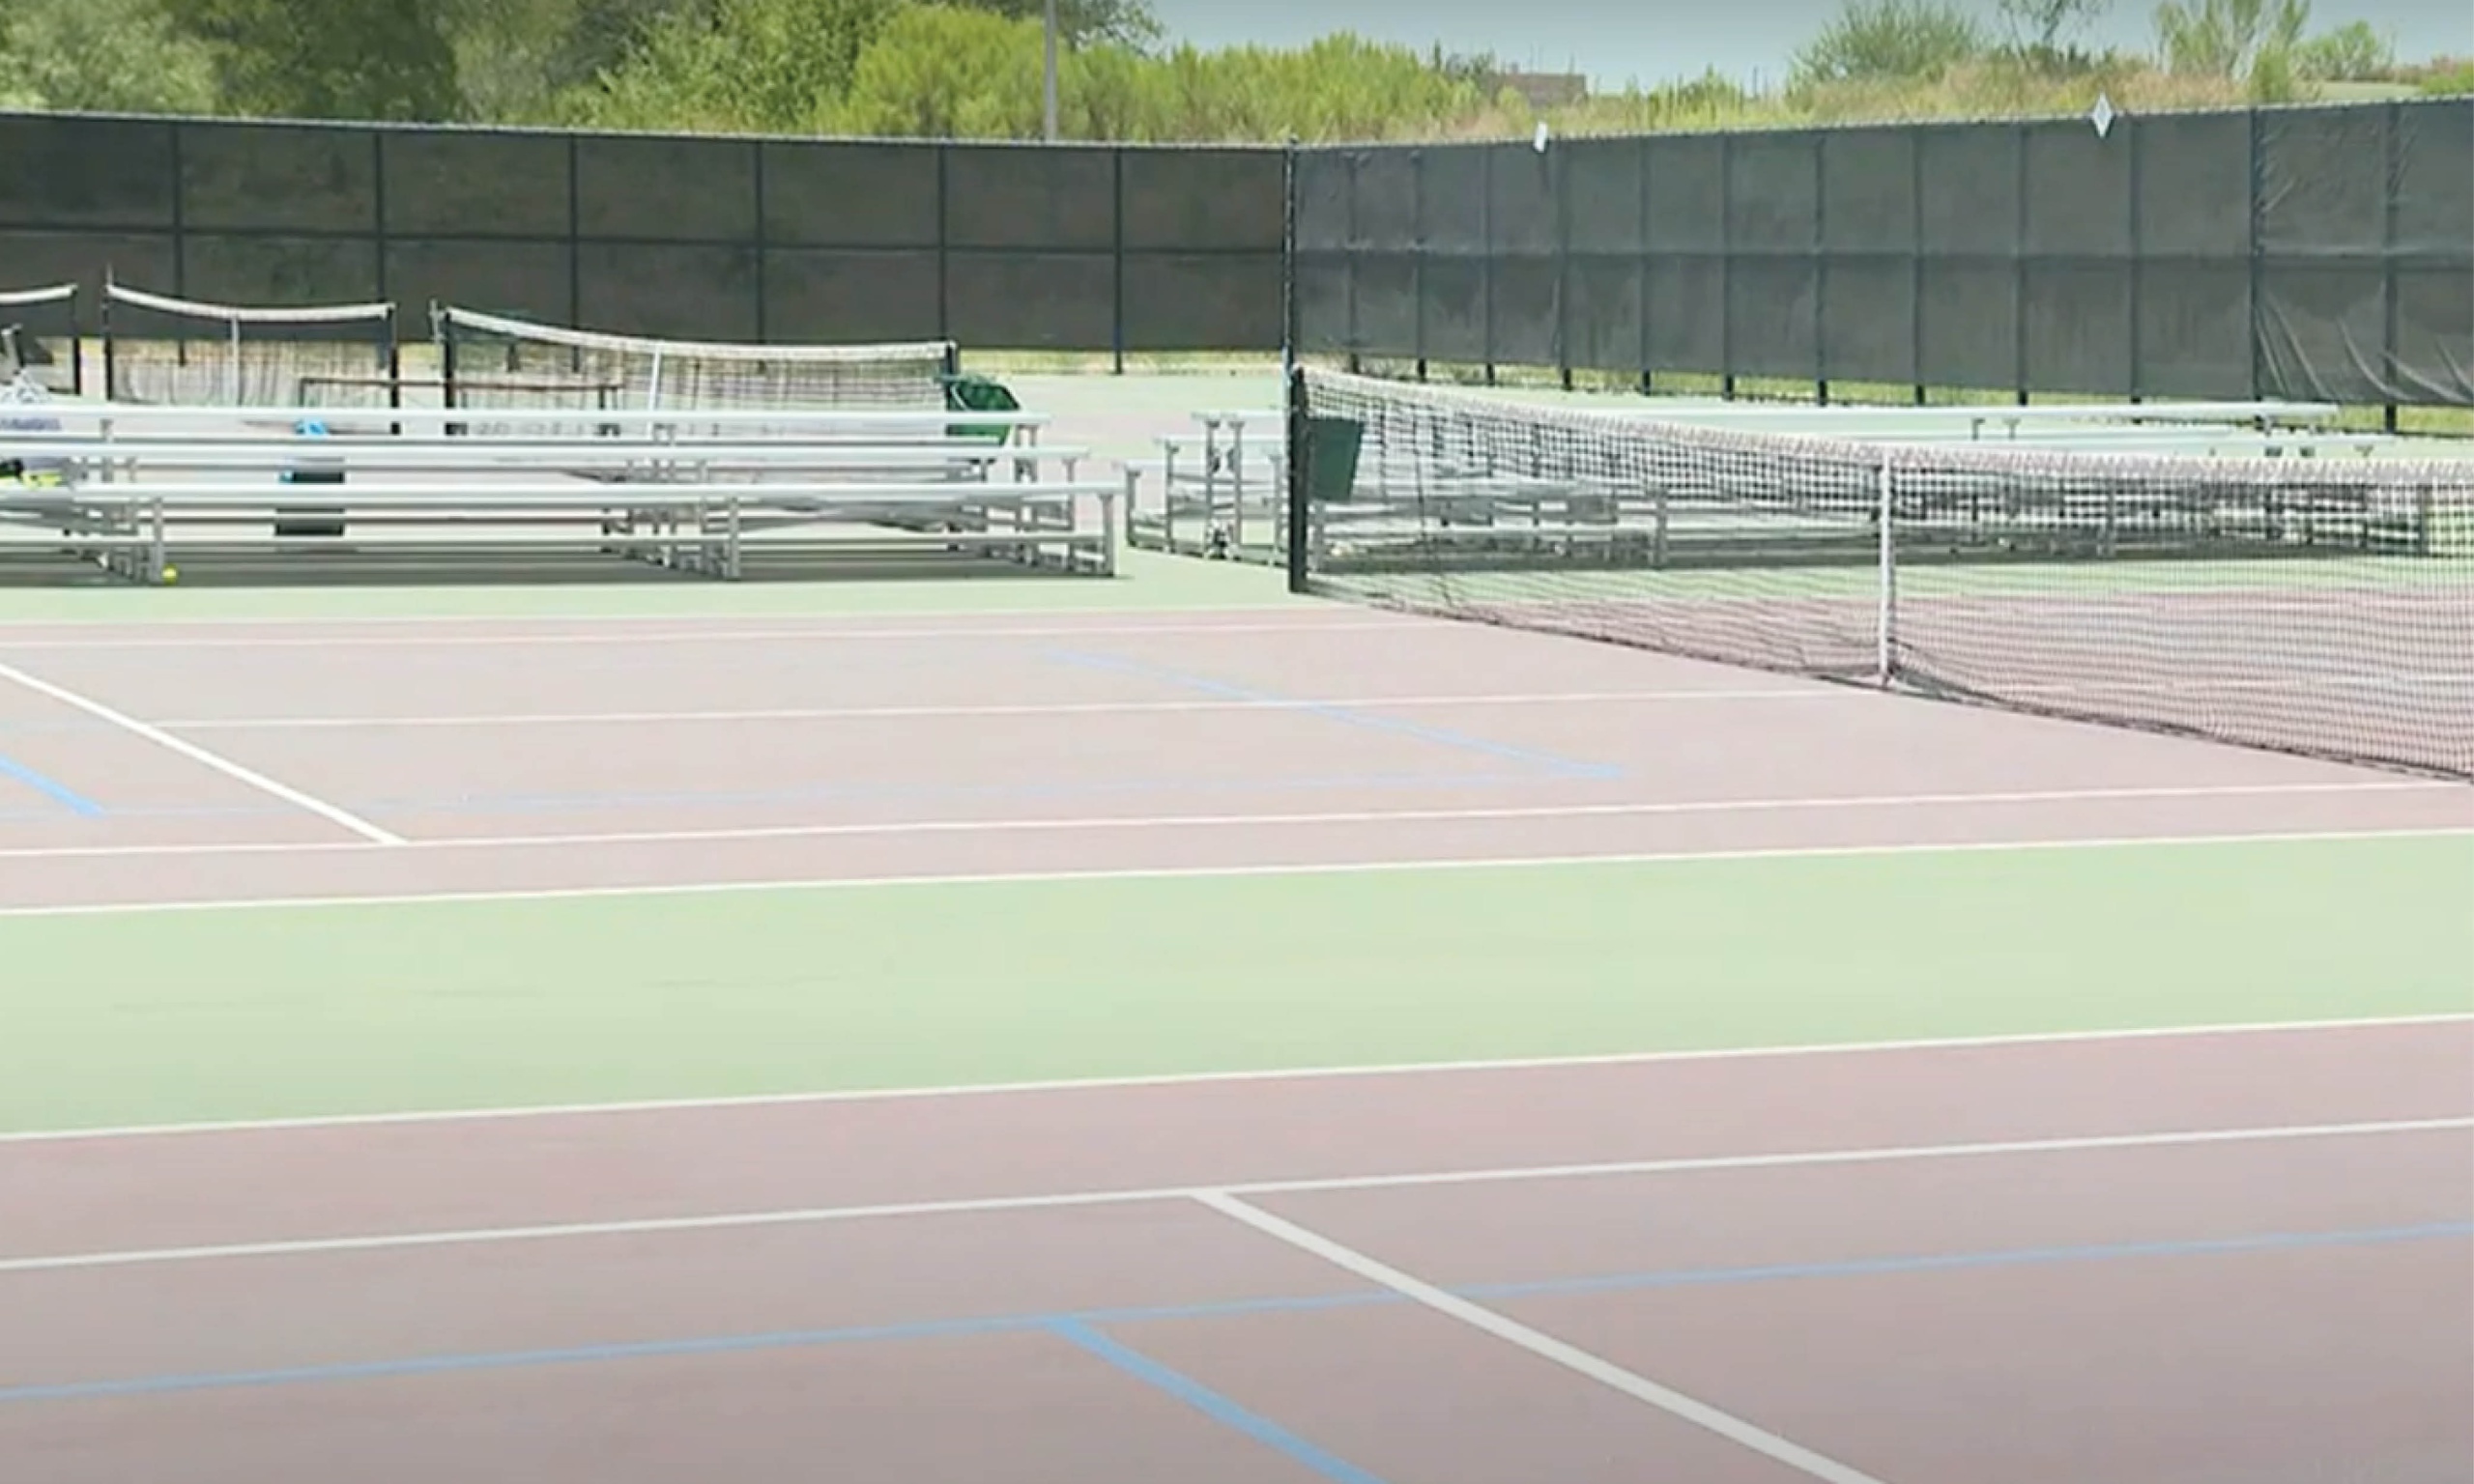 Tennis courts at modern facility.